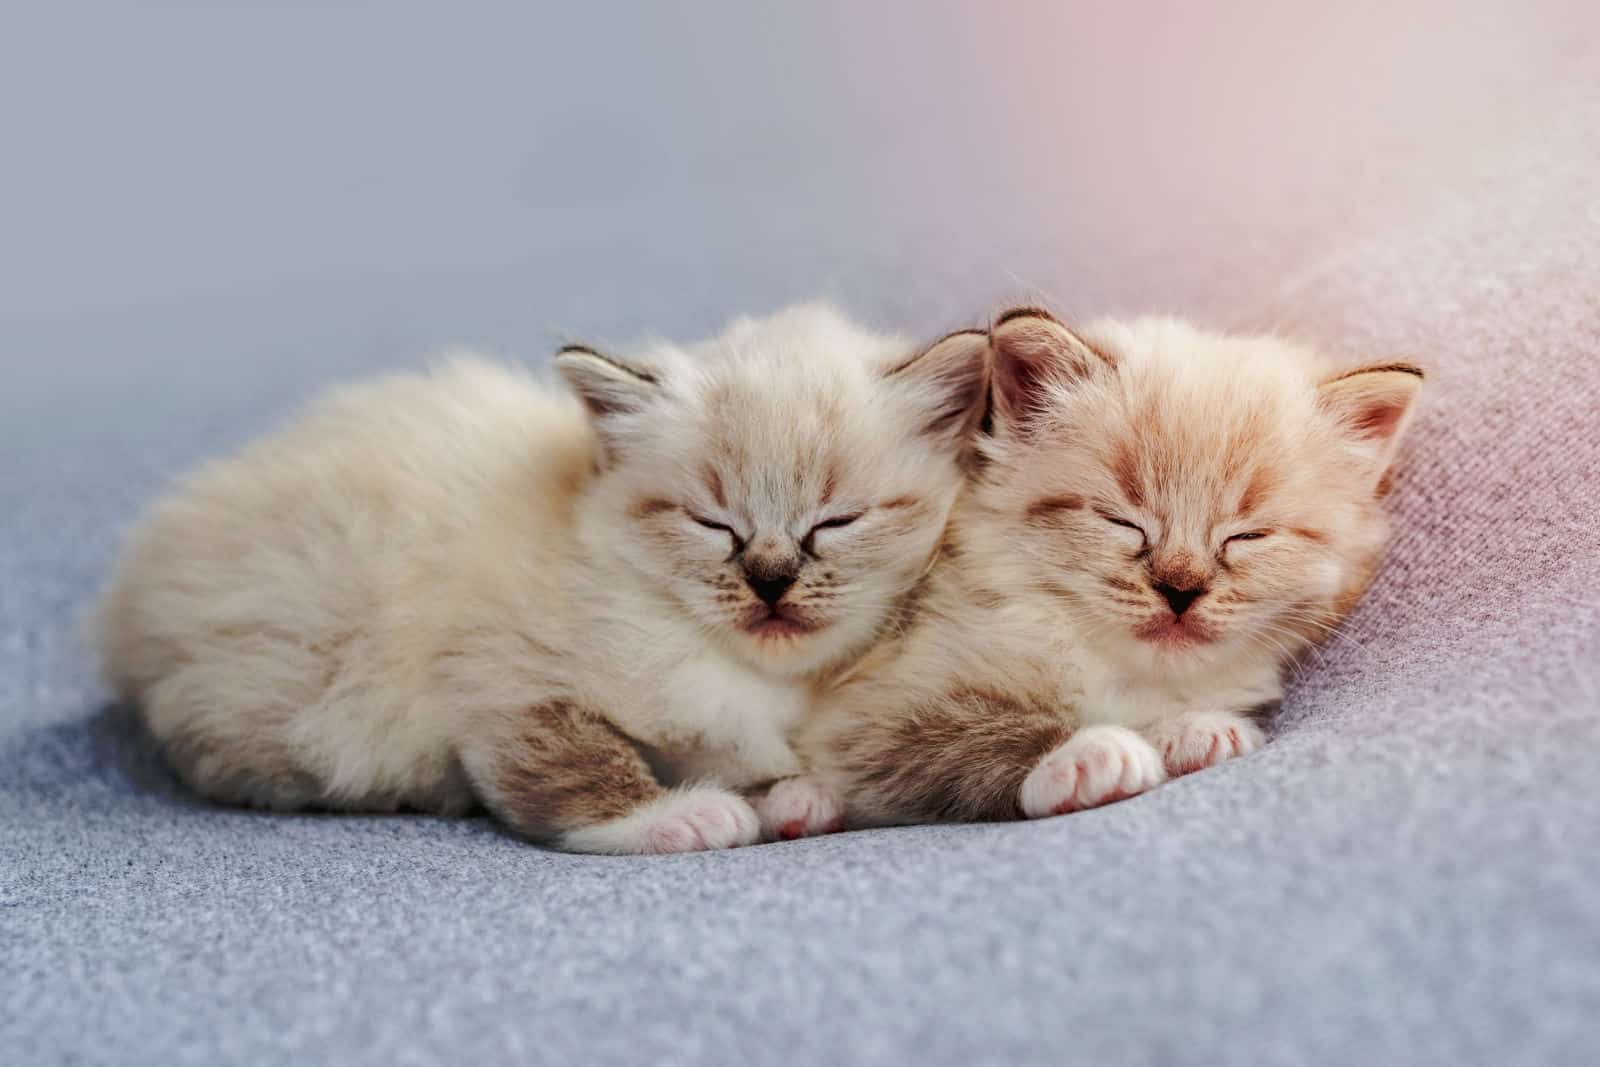 Two adorable little ragdoll kittens sleeping together on light blue fabric